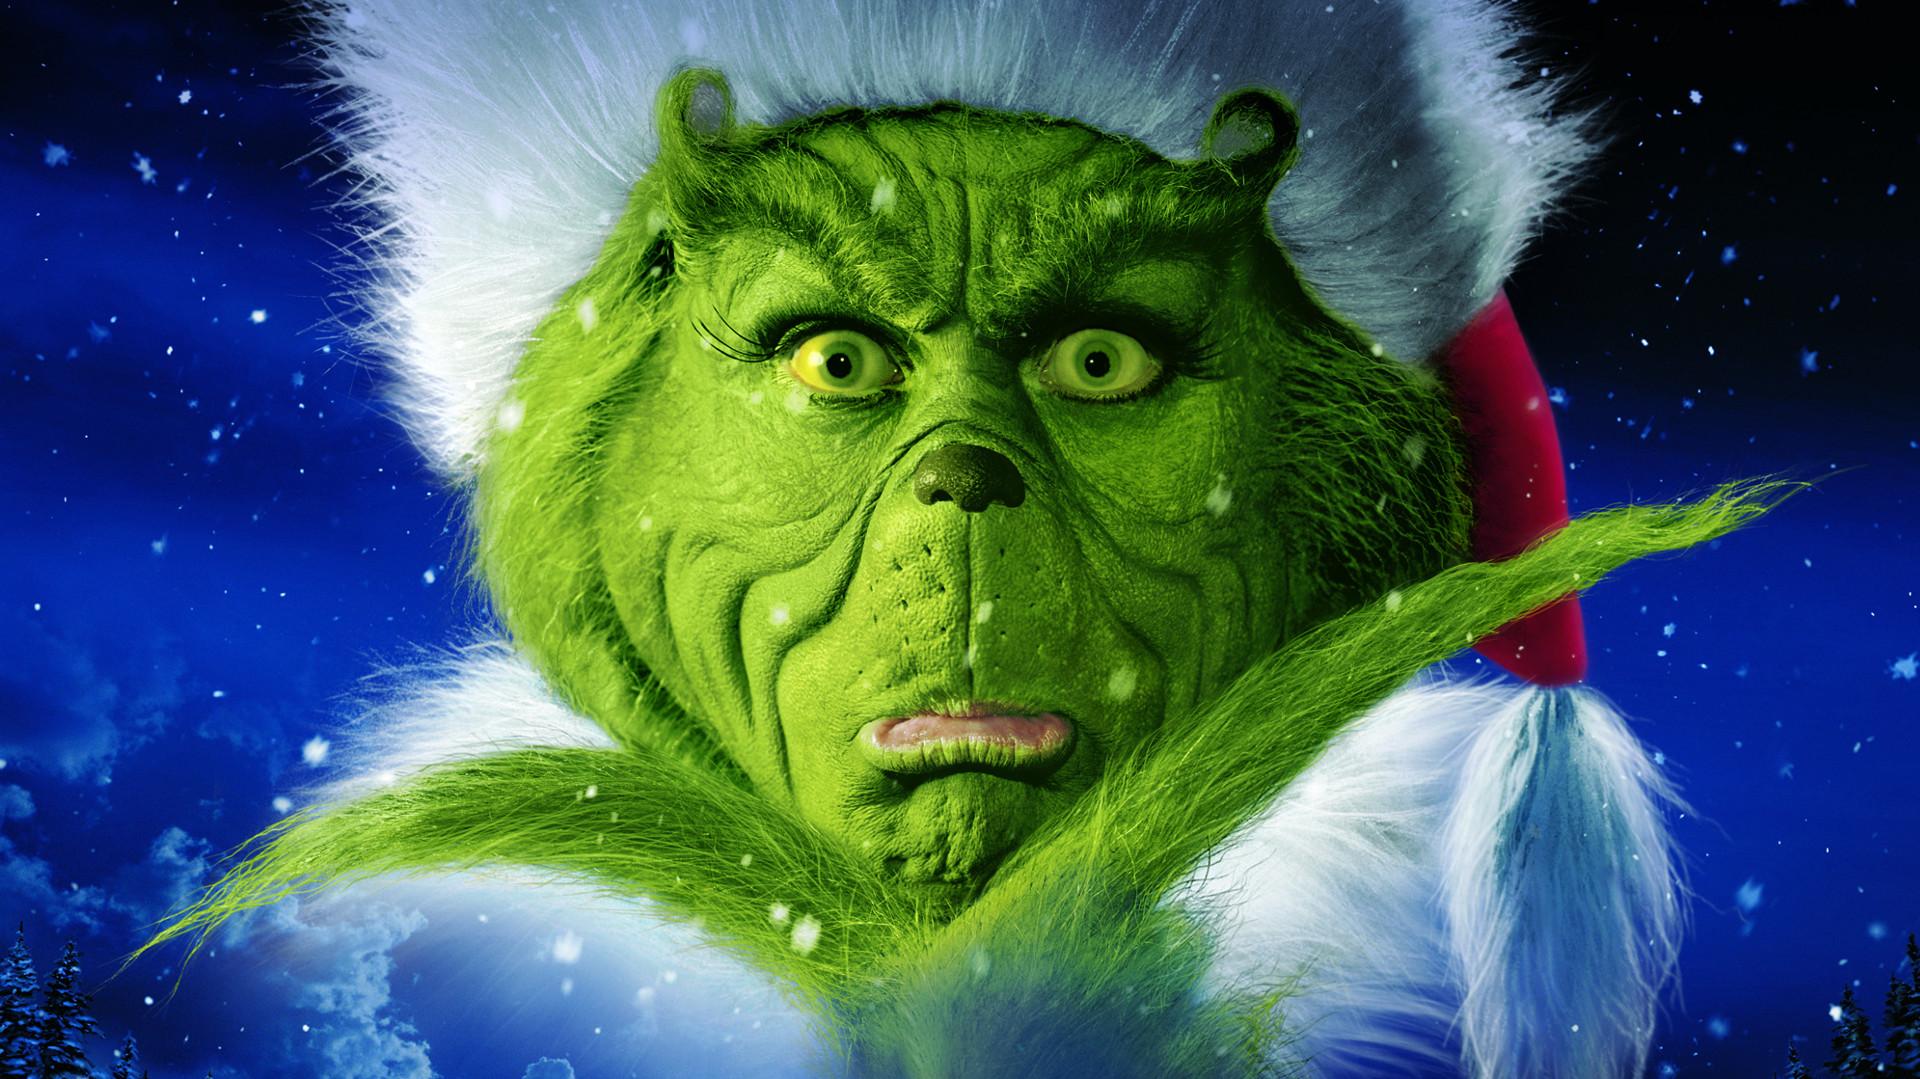 How The Grinch Stole Christmas HD Wallpaper And Background